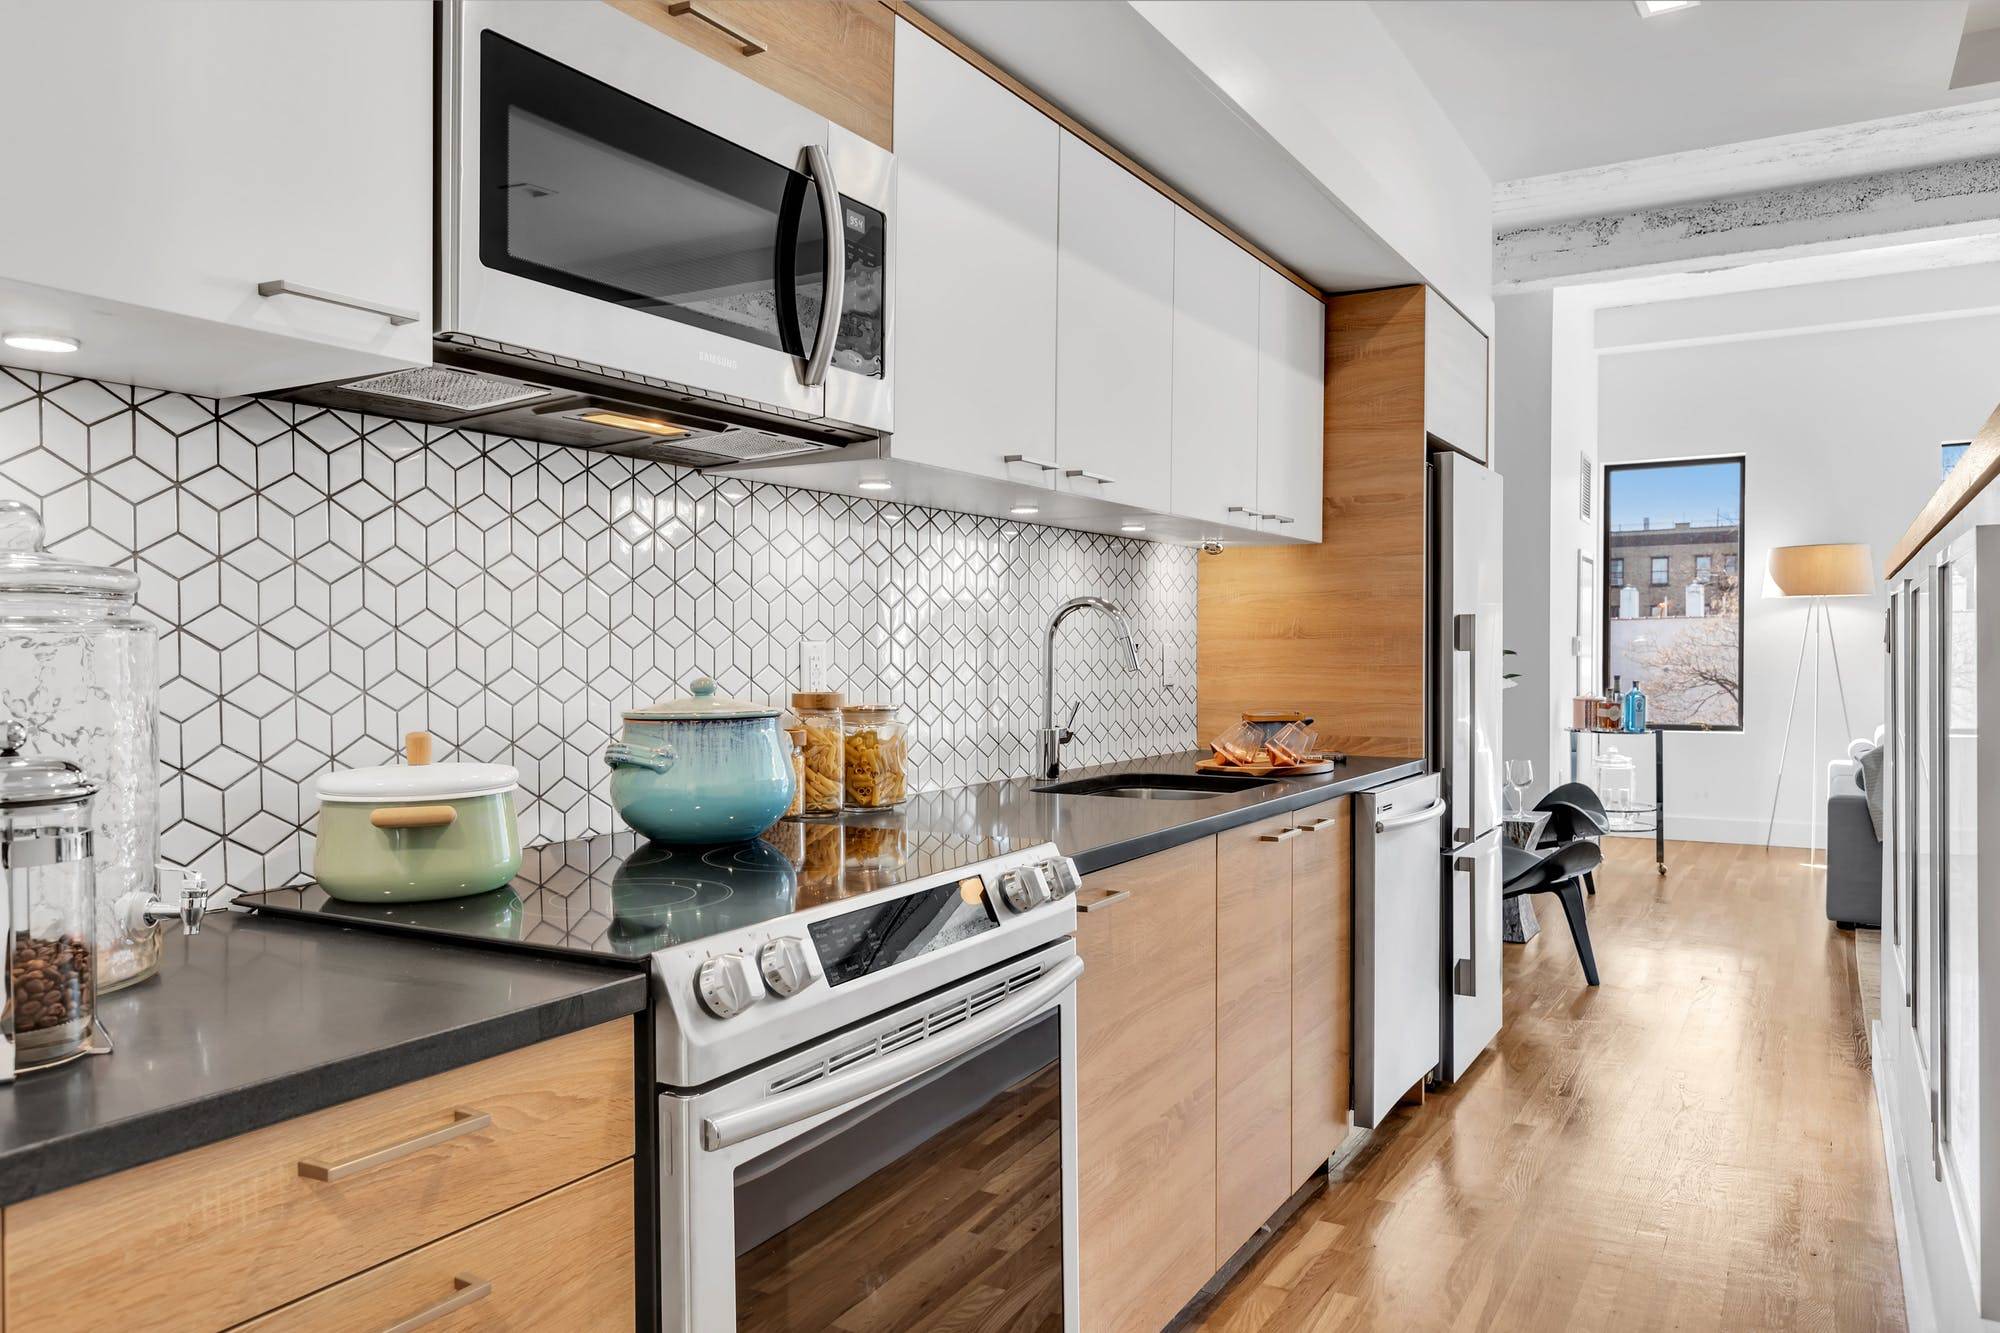 Welcome To Lofts At 515 Ocean Avenue, Prospect Park South.